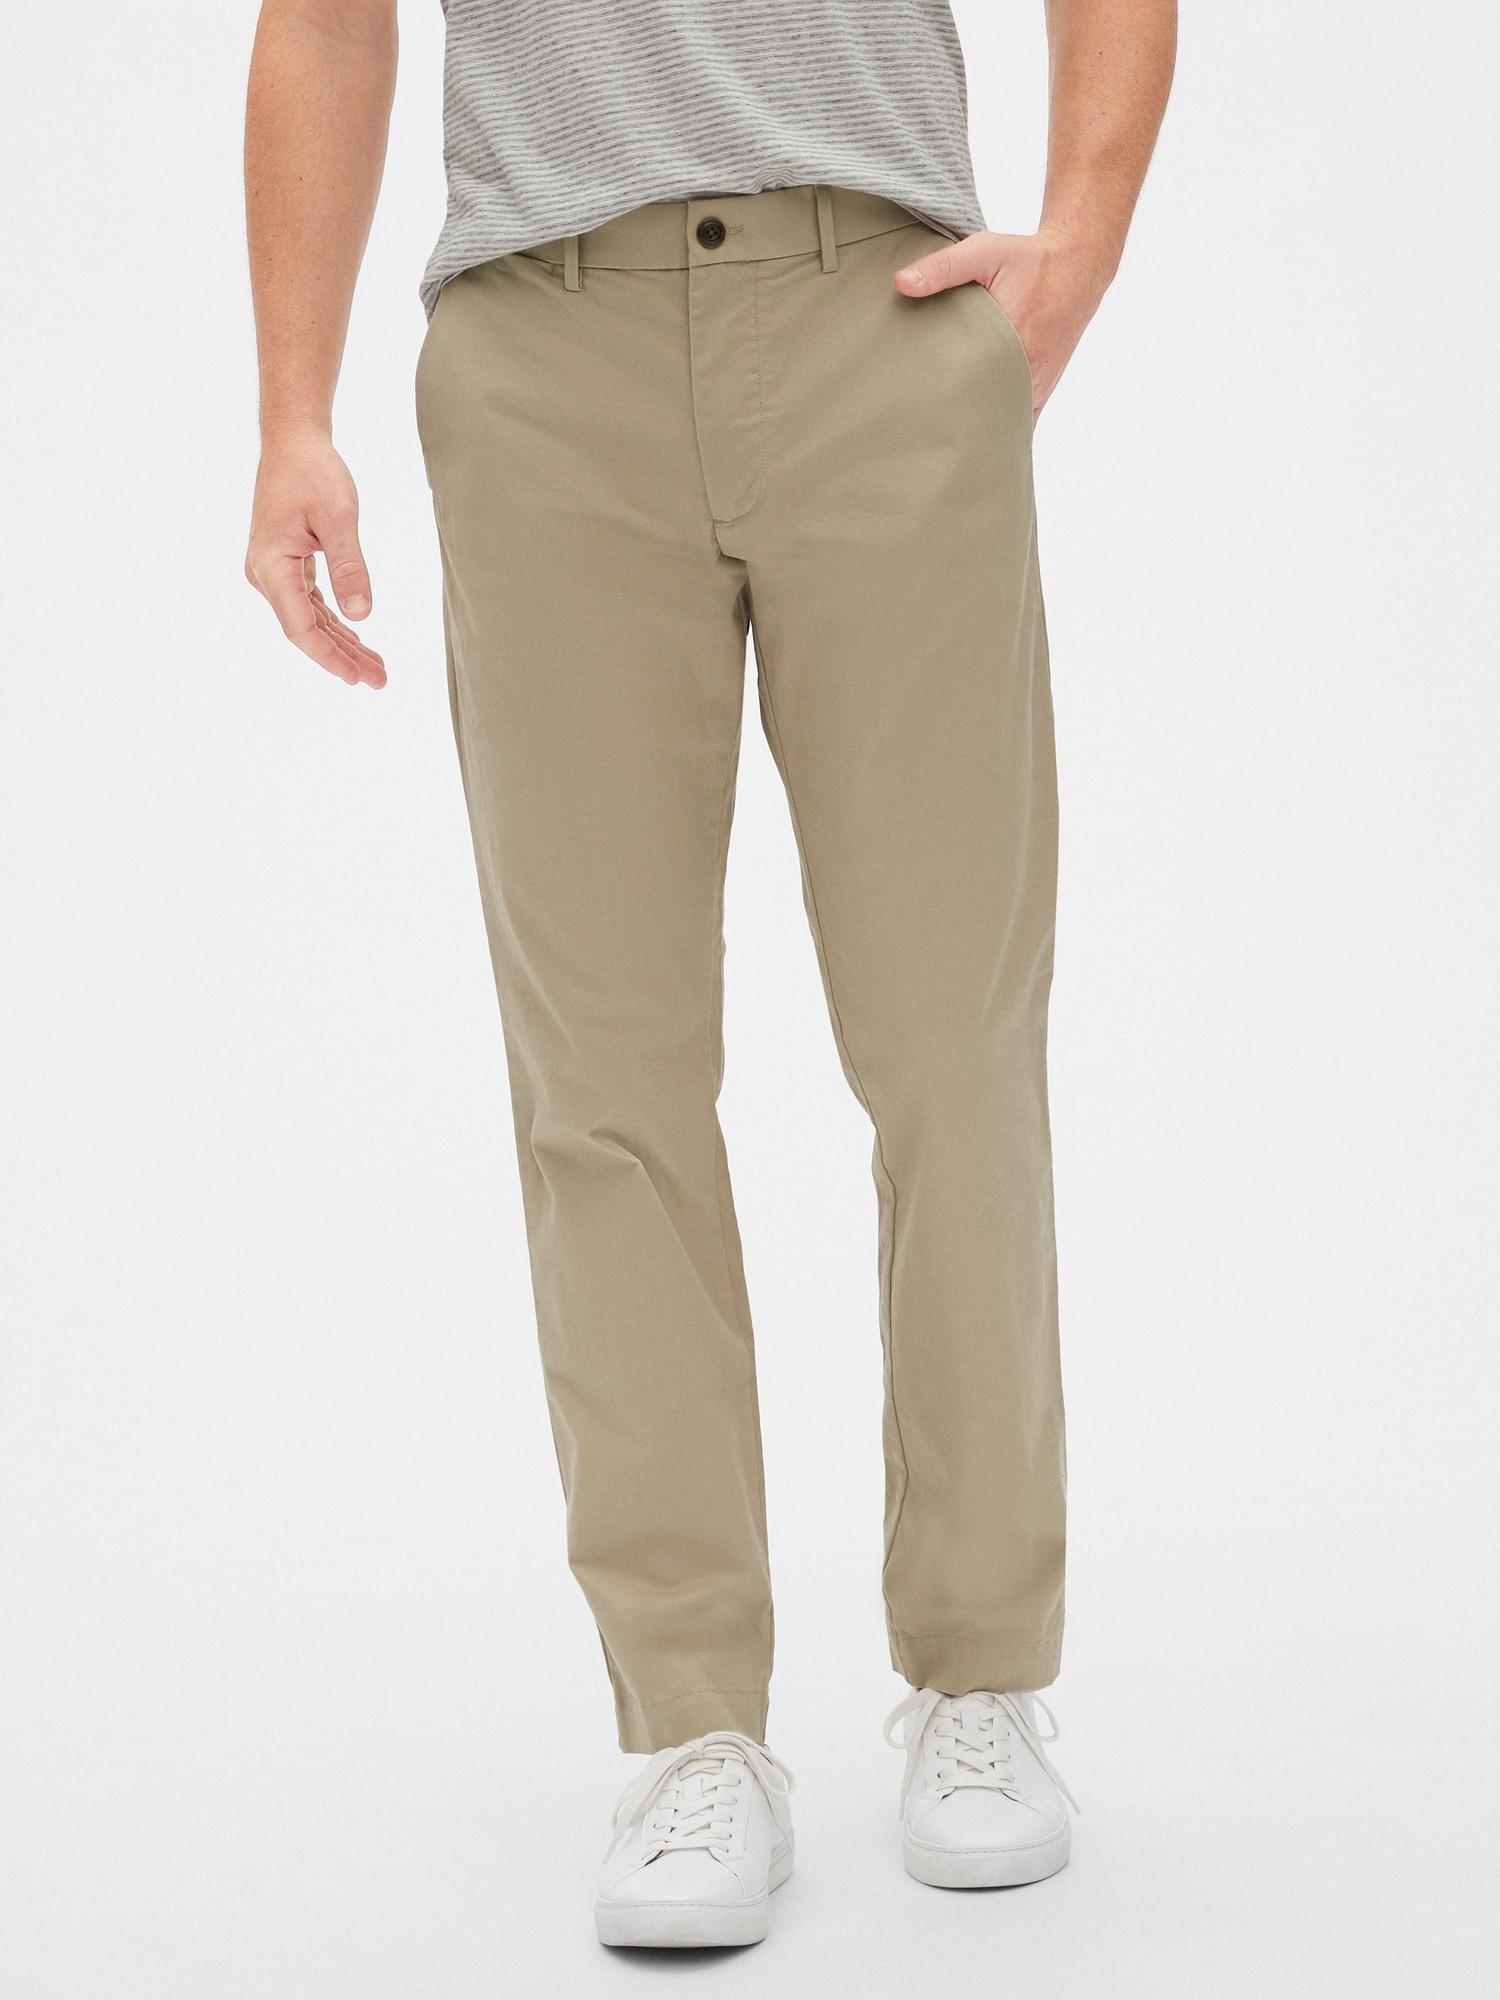 Gap Modern Khakis In Skinny Fit With Flex in Natural for Men - Lyst